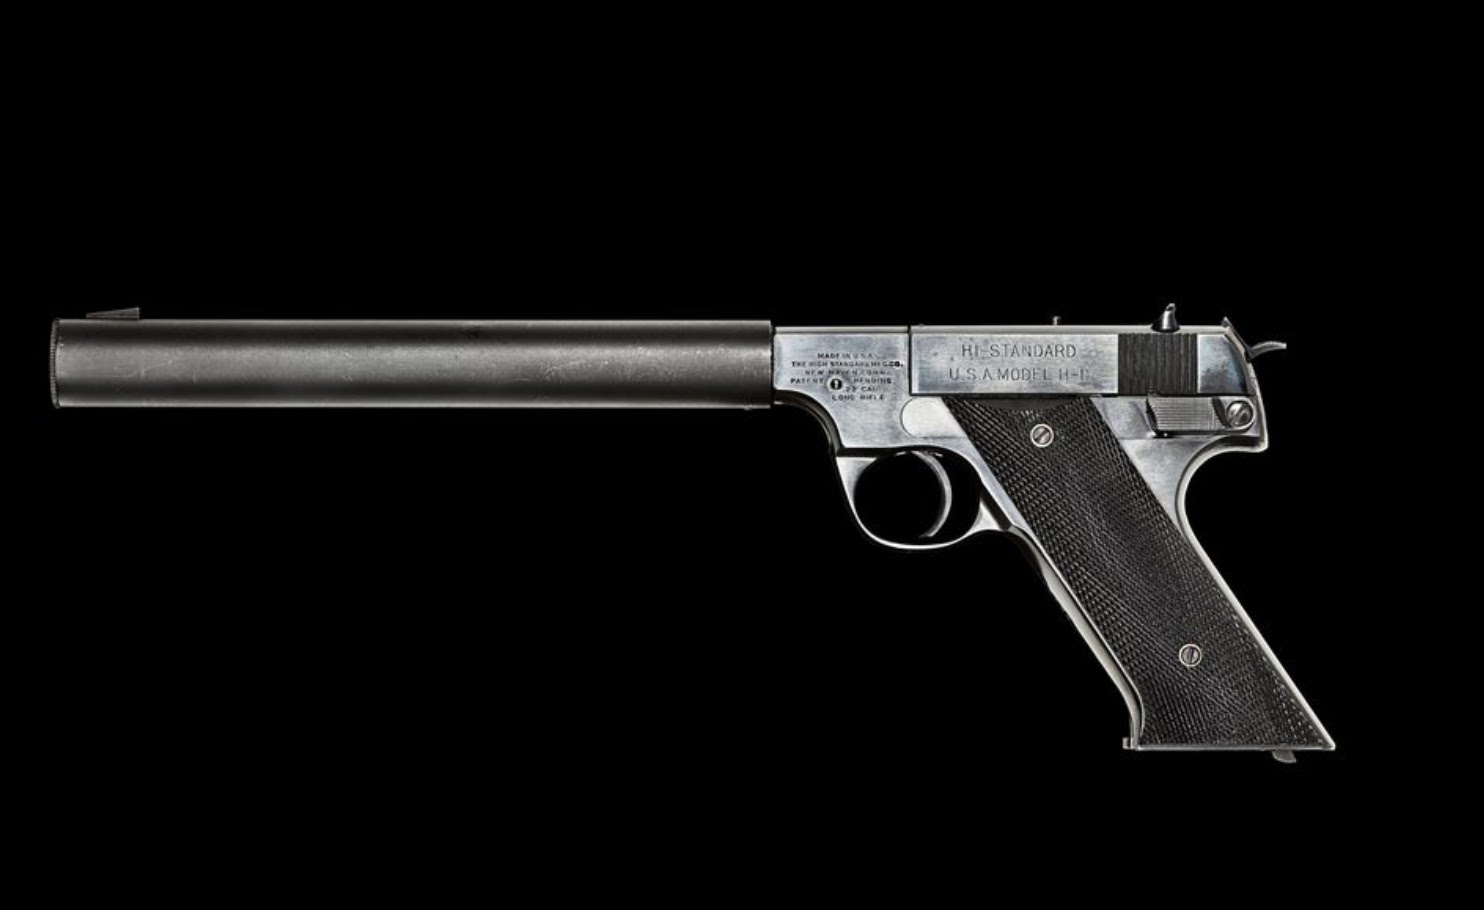 High Standard .22 was used during WWII and the Cold War by US spies